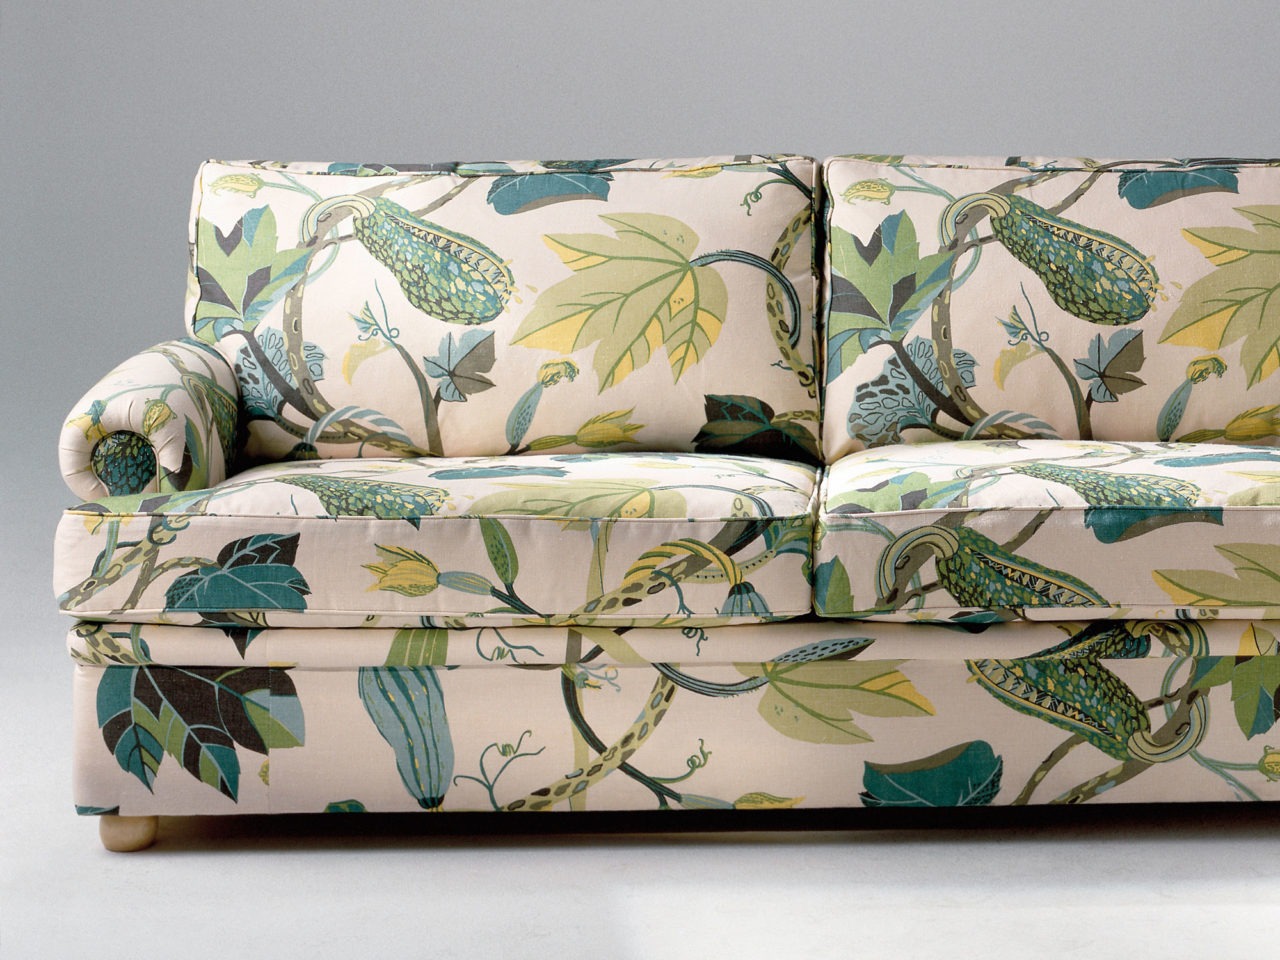 Sofa with bold multi-coloured floral pattern in green and yellow.